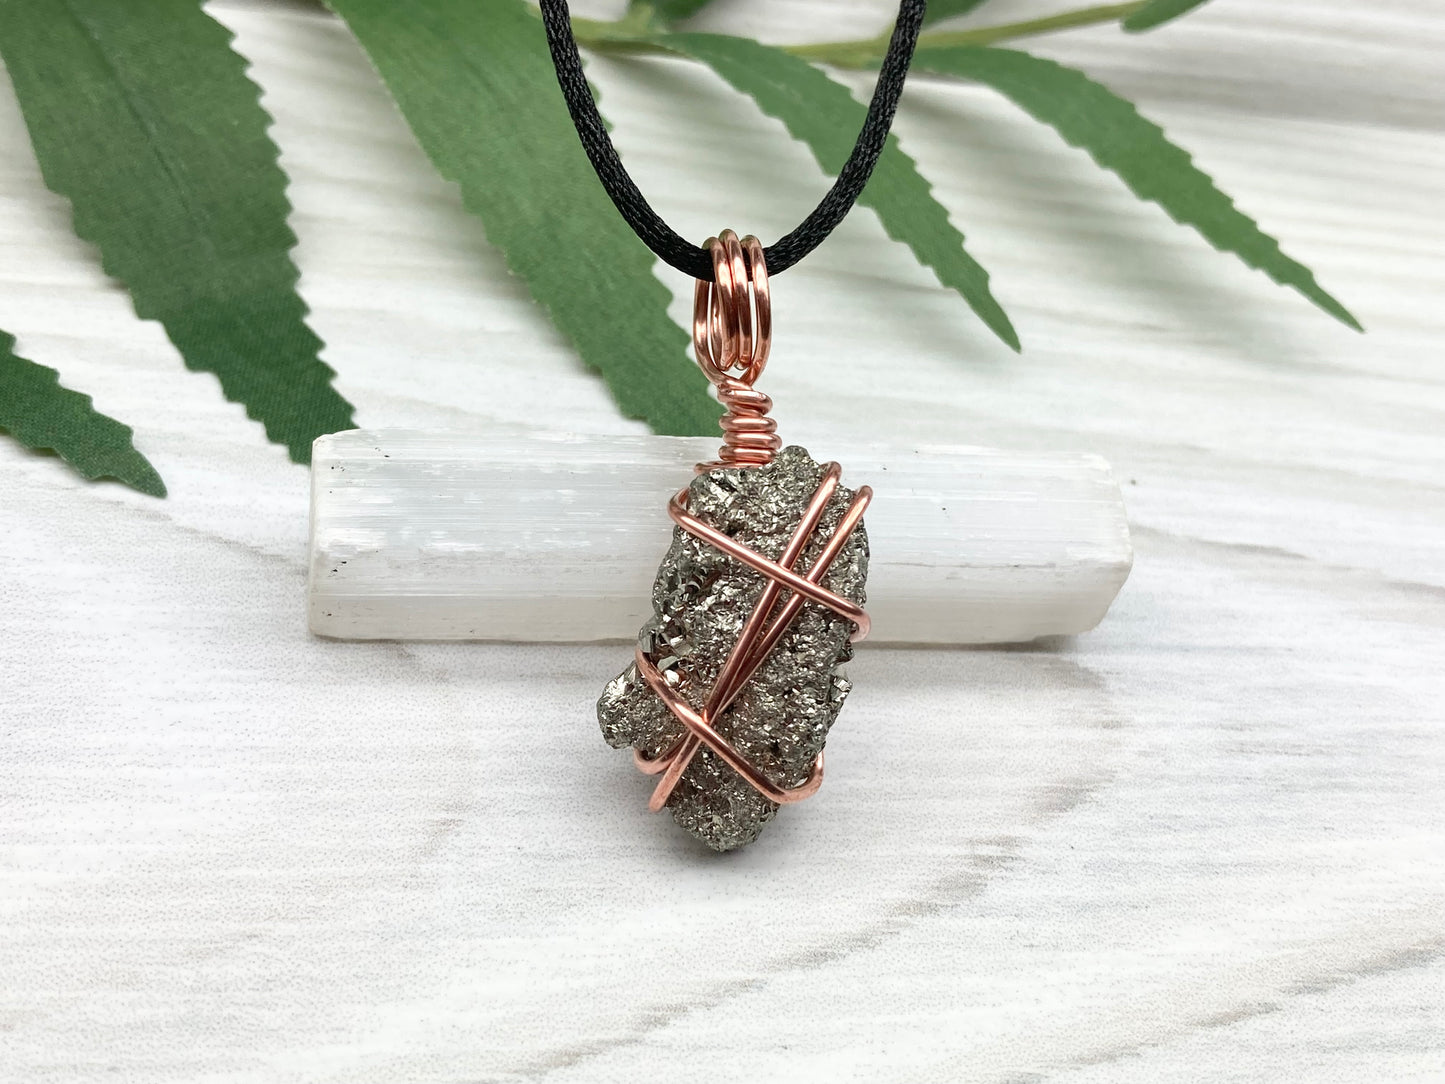 Raw Pyrite Necklace. Real Pyrite Stone Hand Wrapped With Copper Wire. Fools Gold Crystal Pendant. Comes On A Black Chain. Leo And Taurus Zodiac Jewelry. Handmade In Tennessee.